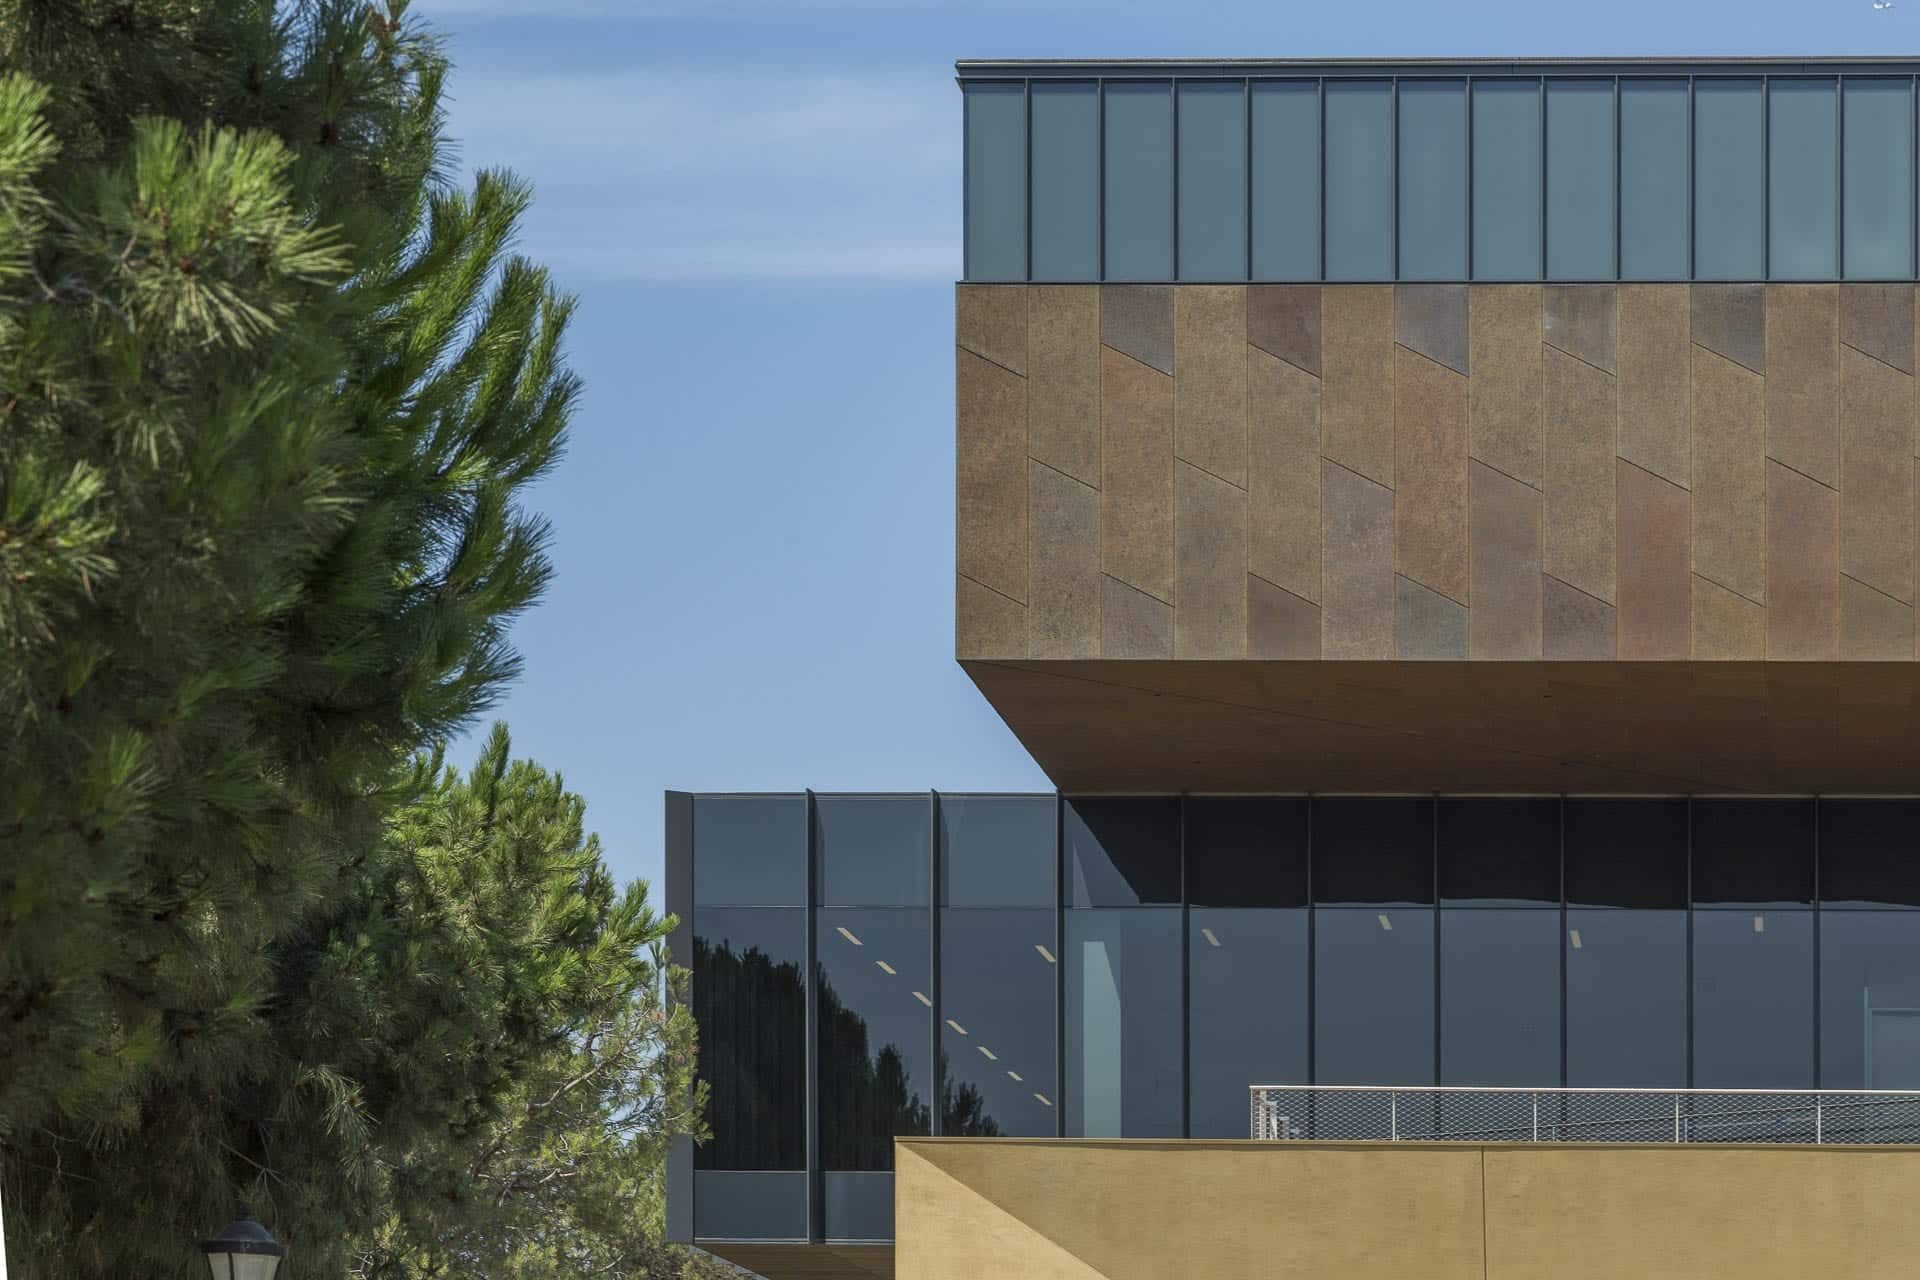 Detail of the cantilevered facade with custom-patinated zinc metalwork, on the McMurtry Building in Stanford, California.